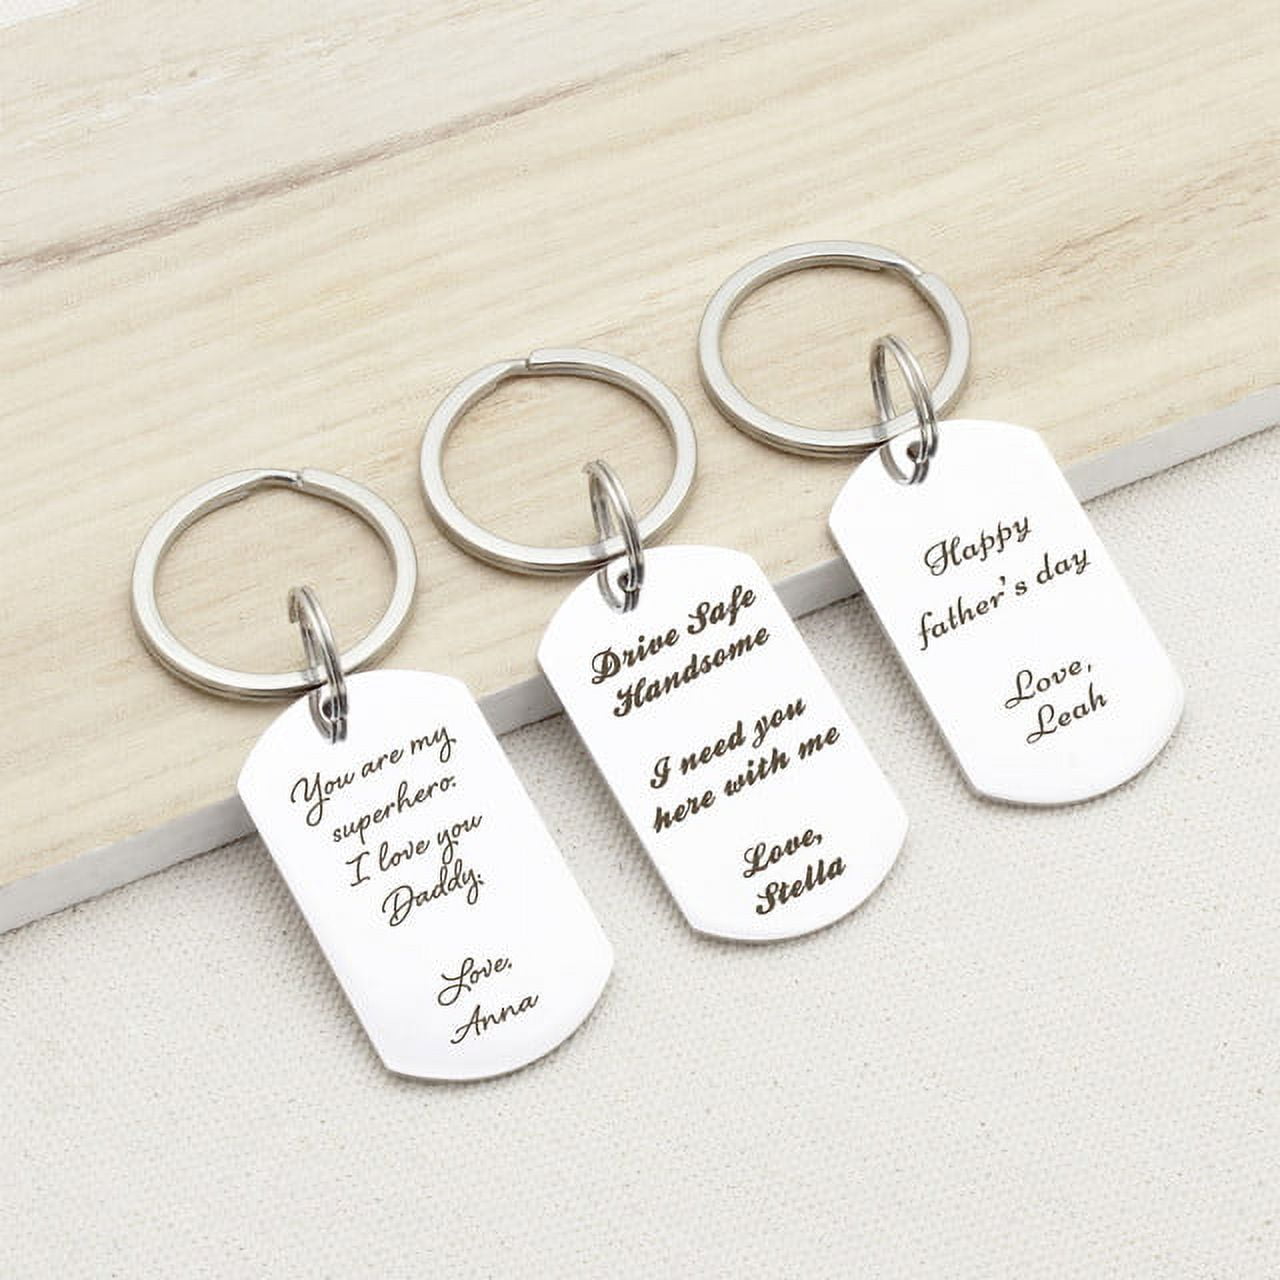 Anavia Fathers Day Gift from Wife - Engraved Keychain - Name Keychain Personalized - Stainless Steel Mens Keychain - Fathers Day for Husband, Adult